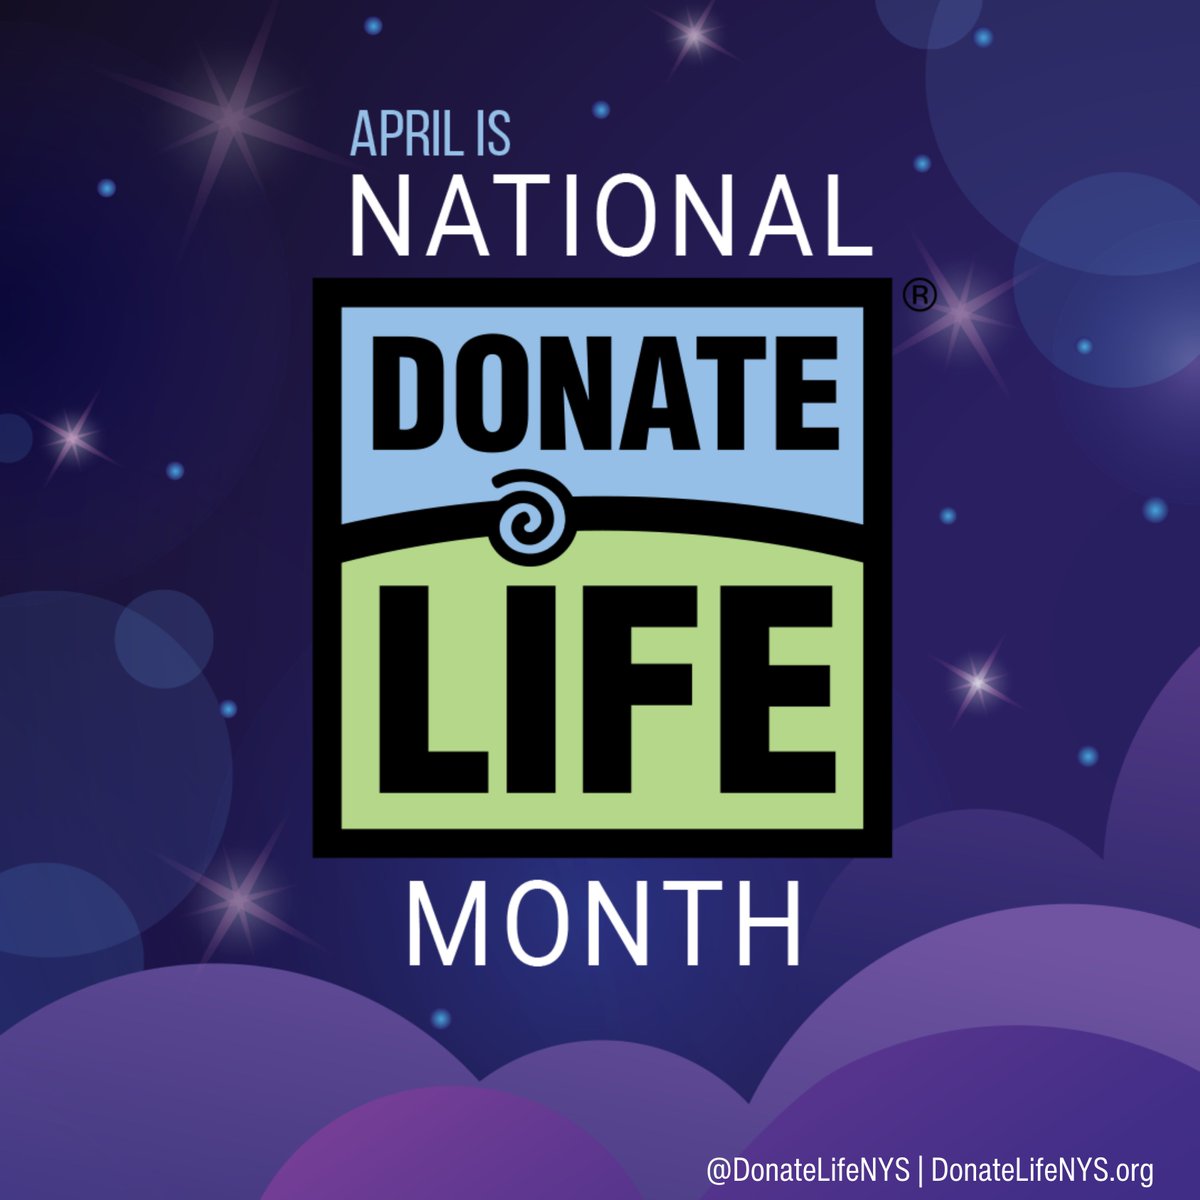 We're joining forces with @DonateLifeNYS to celebrate #DonateLifeMonth Give hope to nearly 8,000 New Yorkers waiting for a lifesaving transplant. Register today as an organ, eye and tissue donor at donatelifenys.org/register. #DonateLifeNYS #DonateLifeMonth #DonateLife